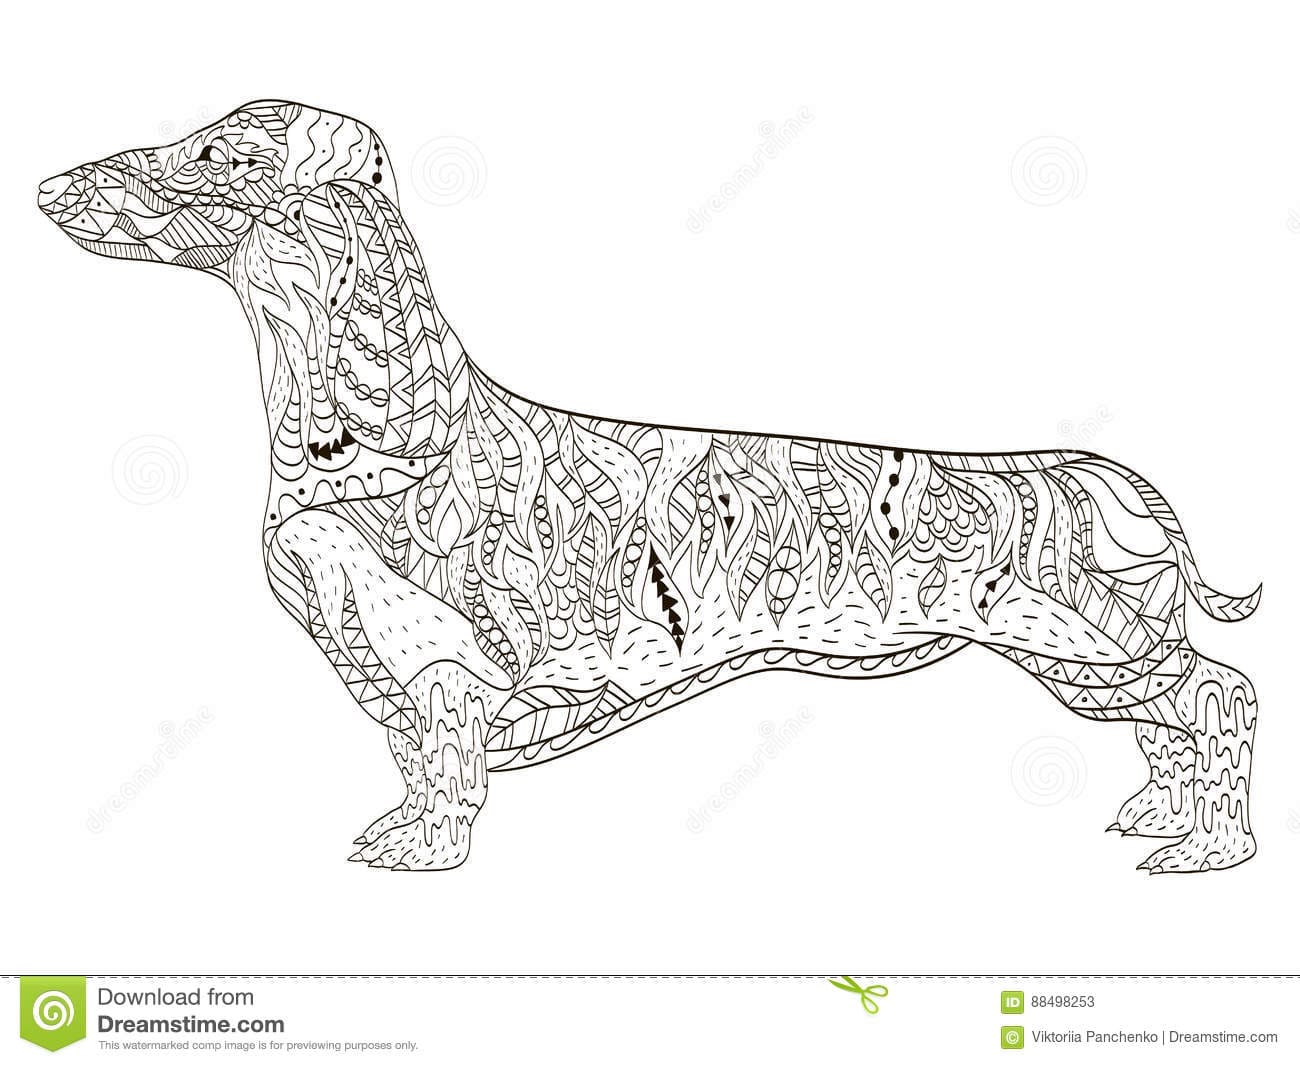 Dachshund Coloring Book For Adults Vector